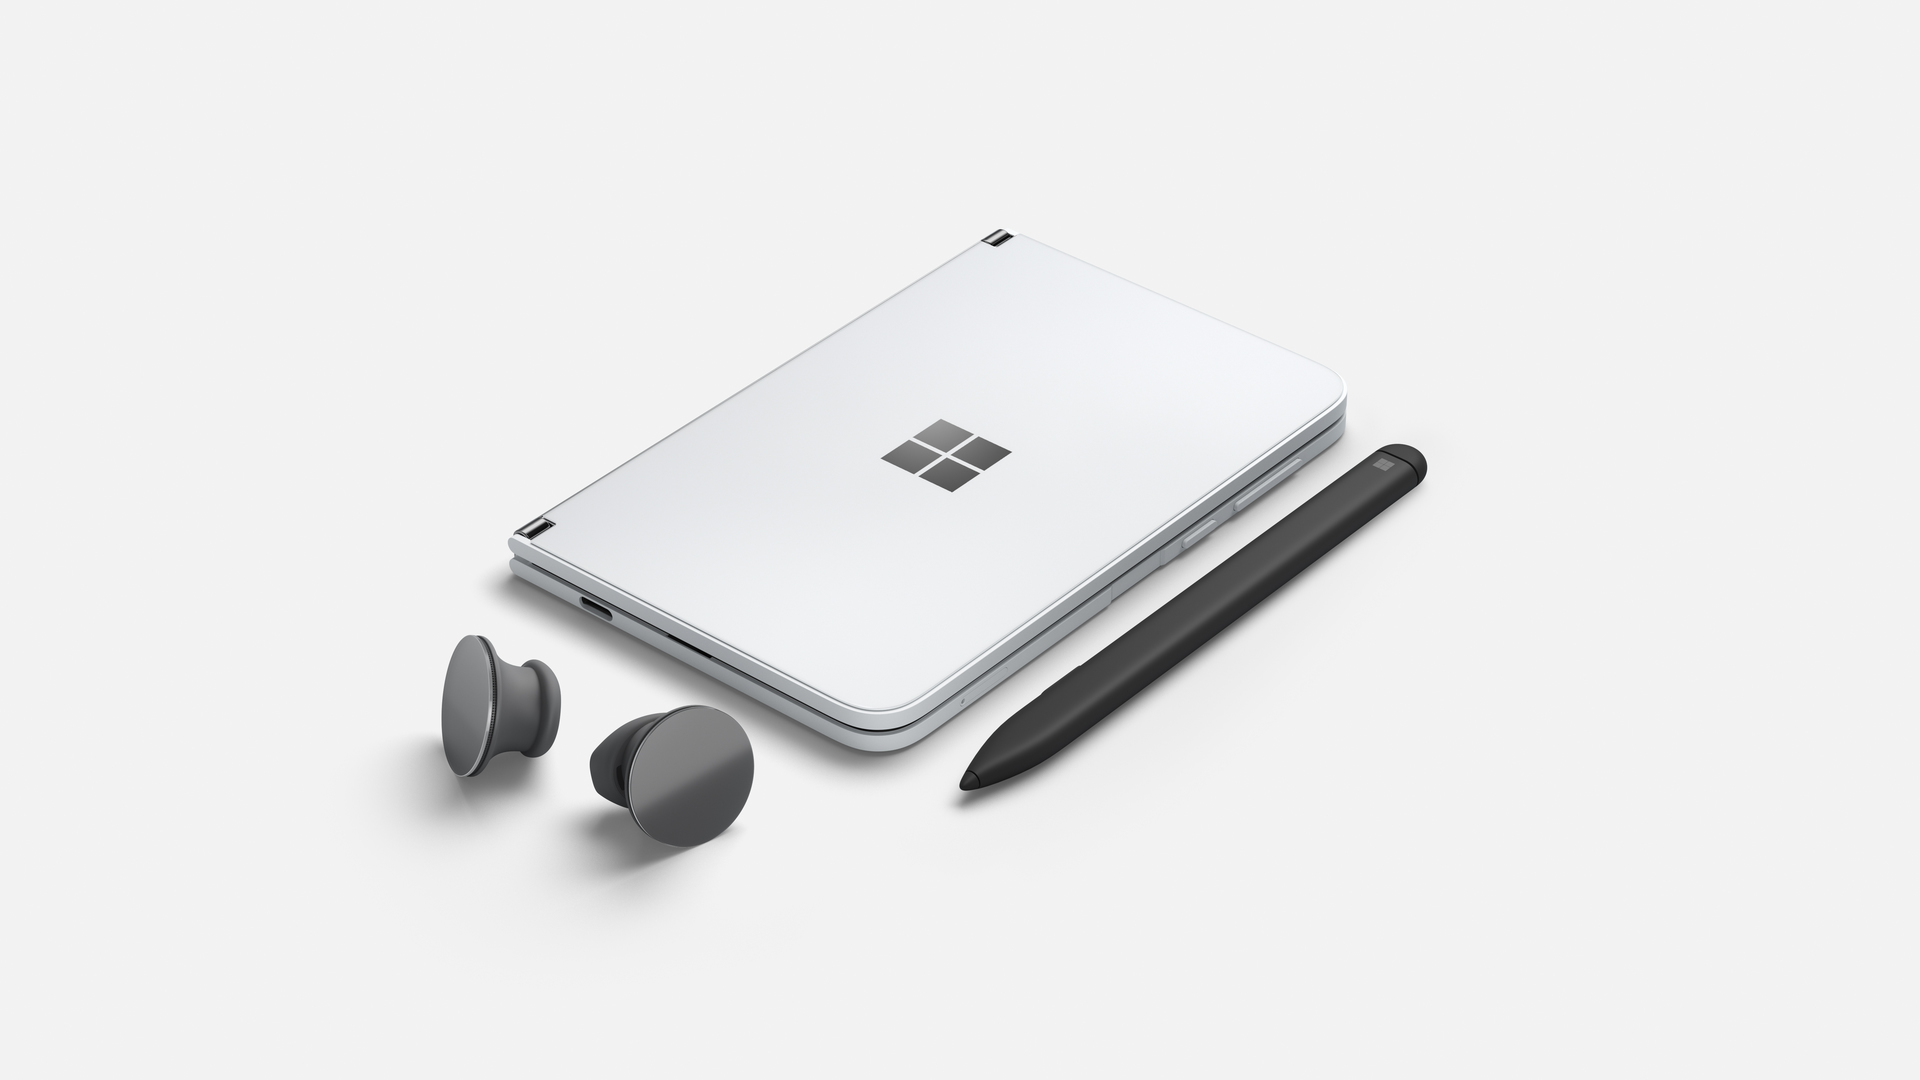 Microsoft Surface Duo closed with Pen and Earbuds